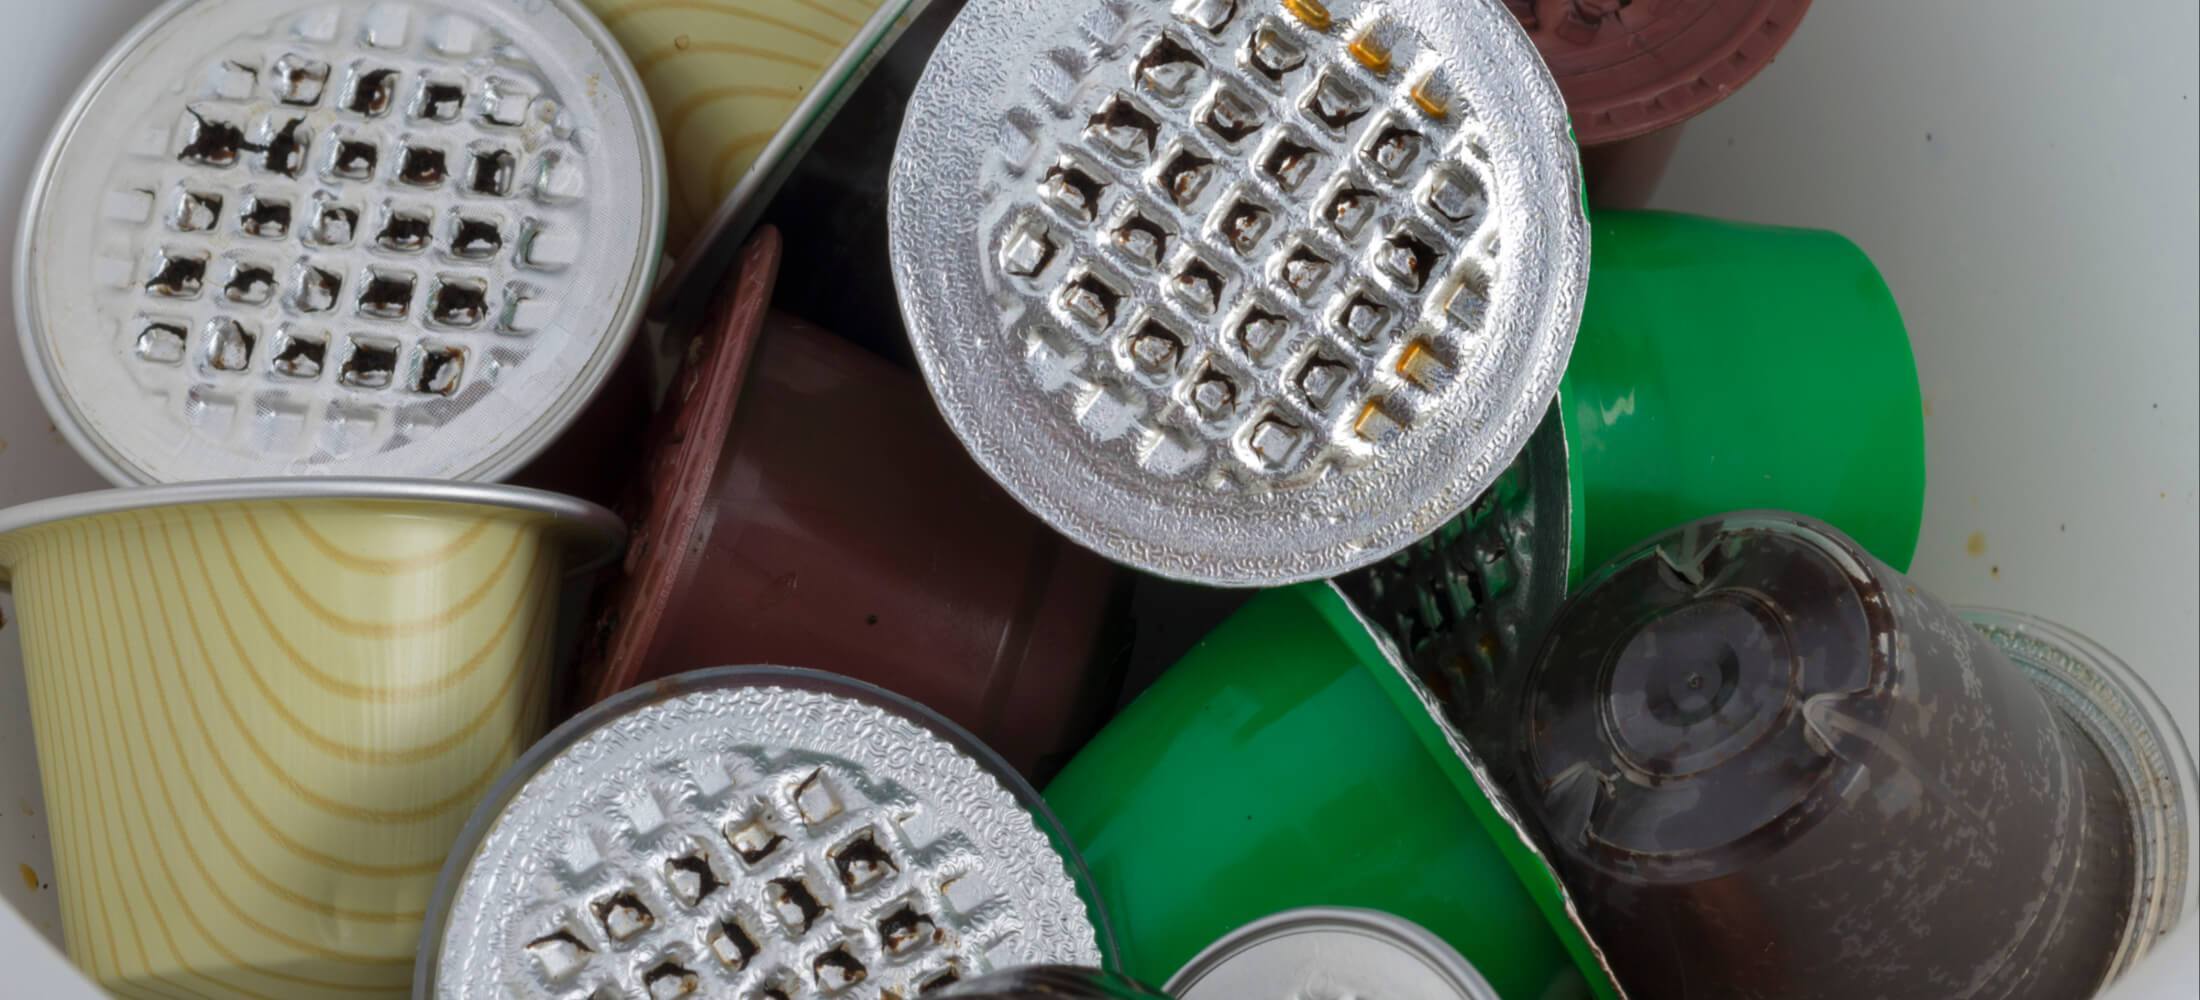 How To Recycle Your K-Cup Pods And Other Capsules